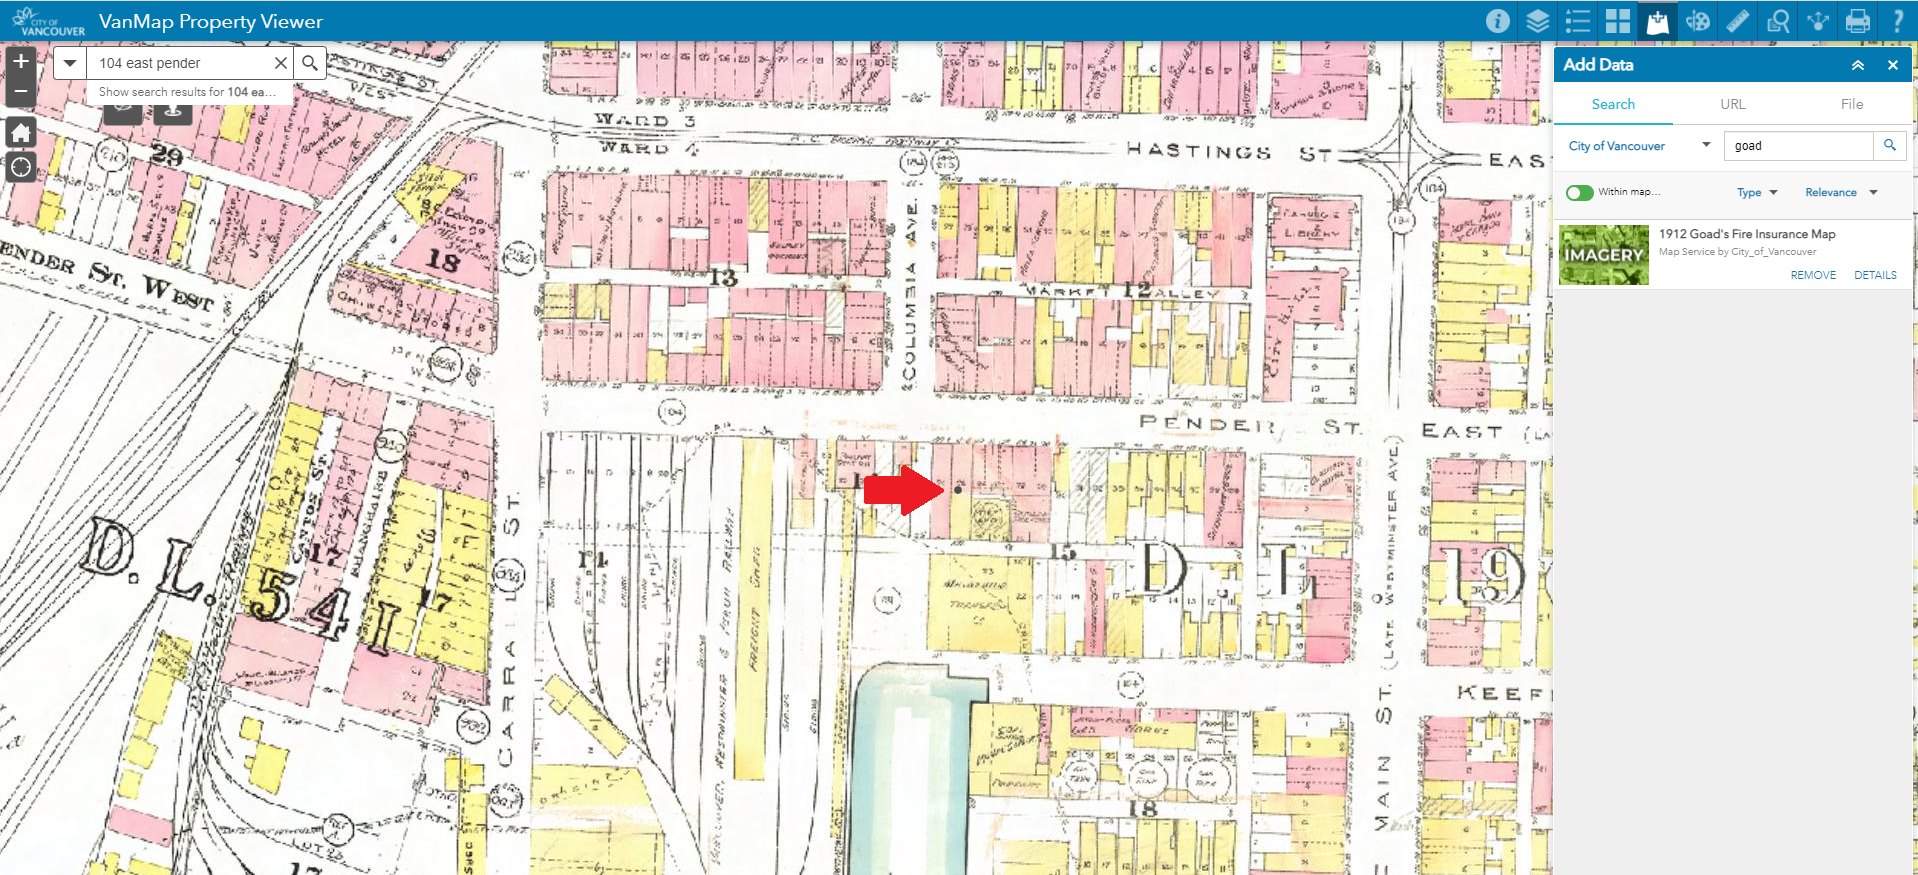 Screen shot of 1912 layer, zoomed in on 104 East Pender